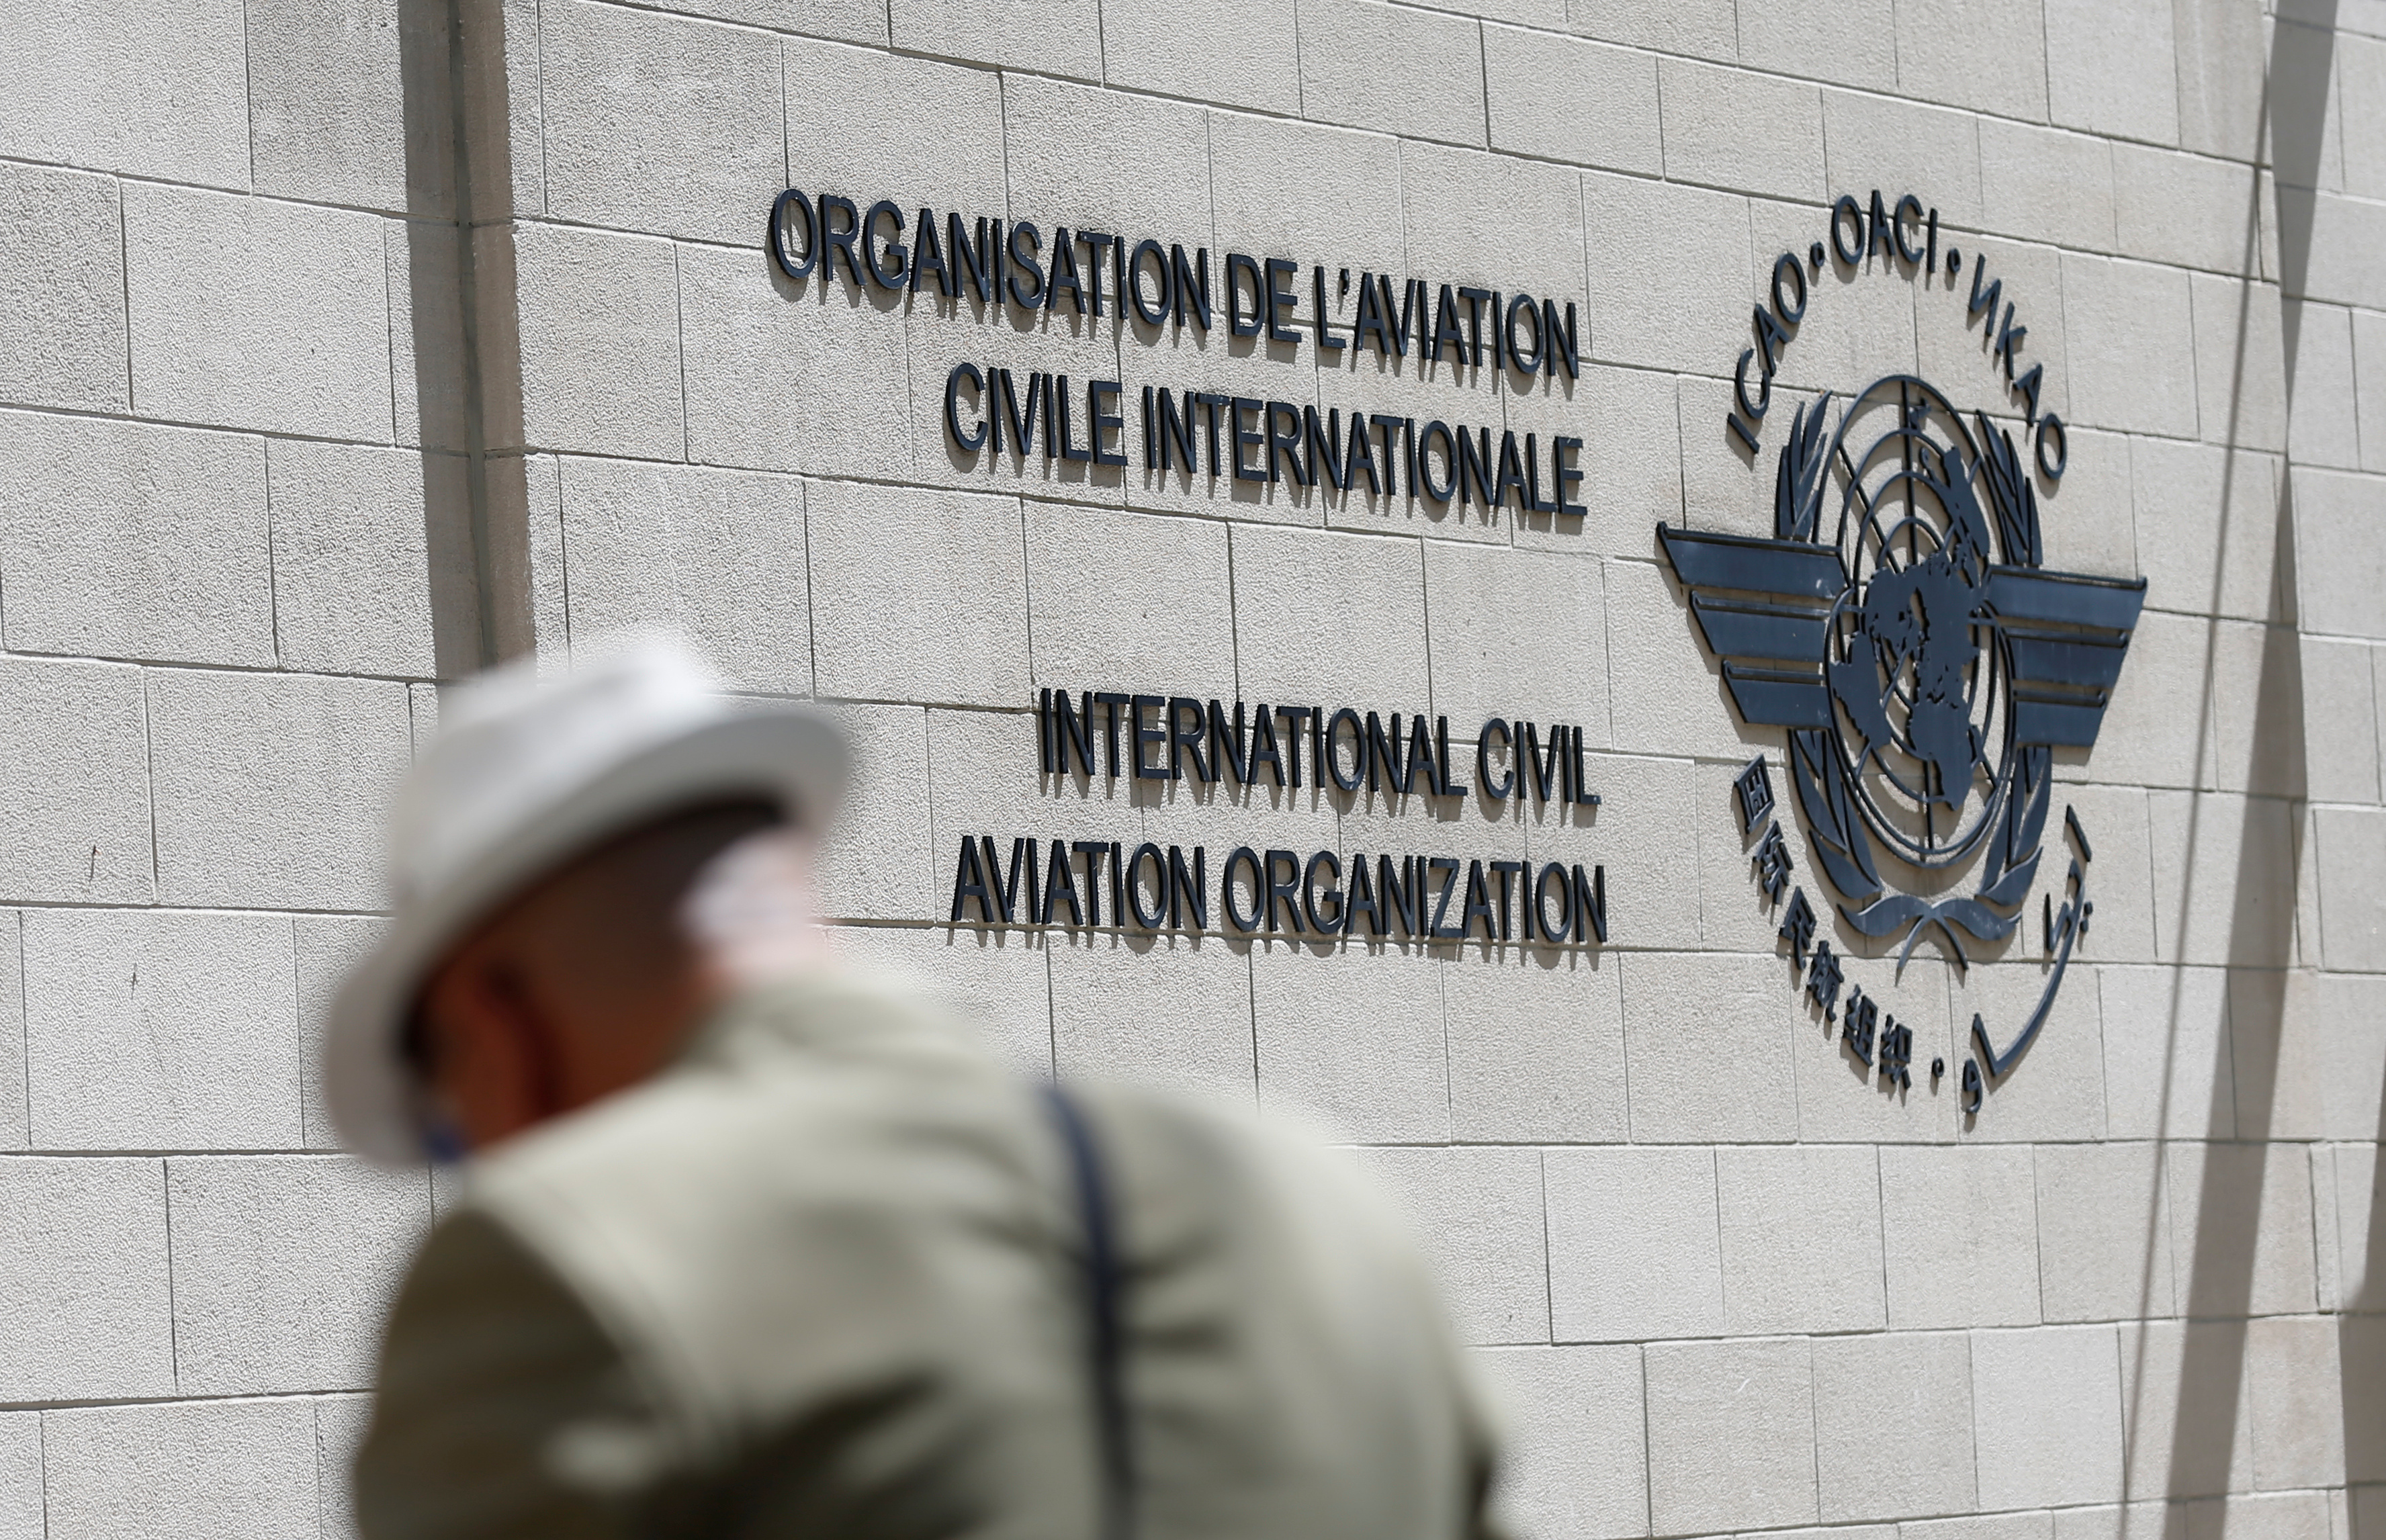 A man eats lunch outside the International Civil Aviation Organization (ICAO) headquarters building in Montreal